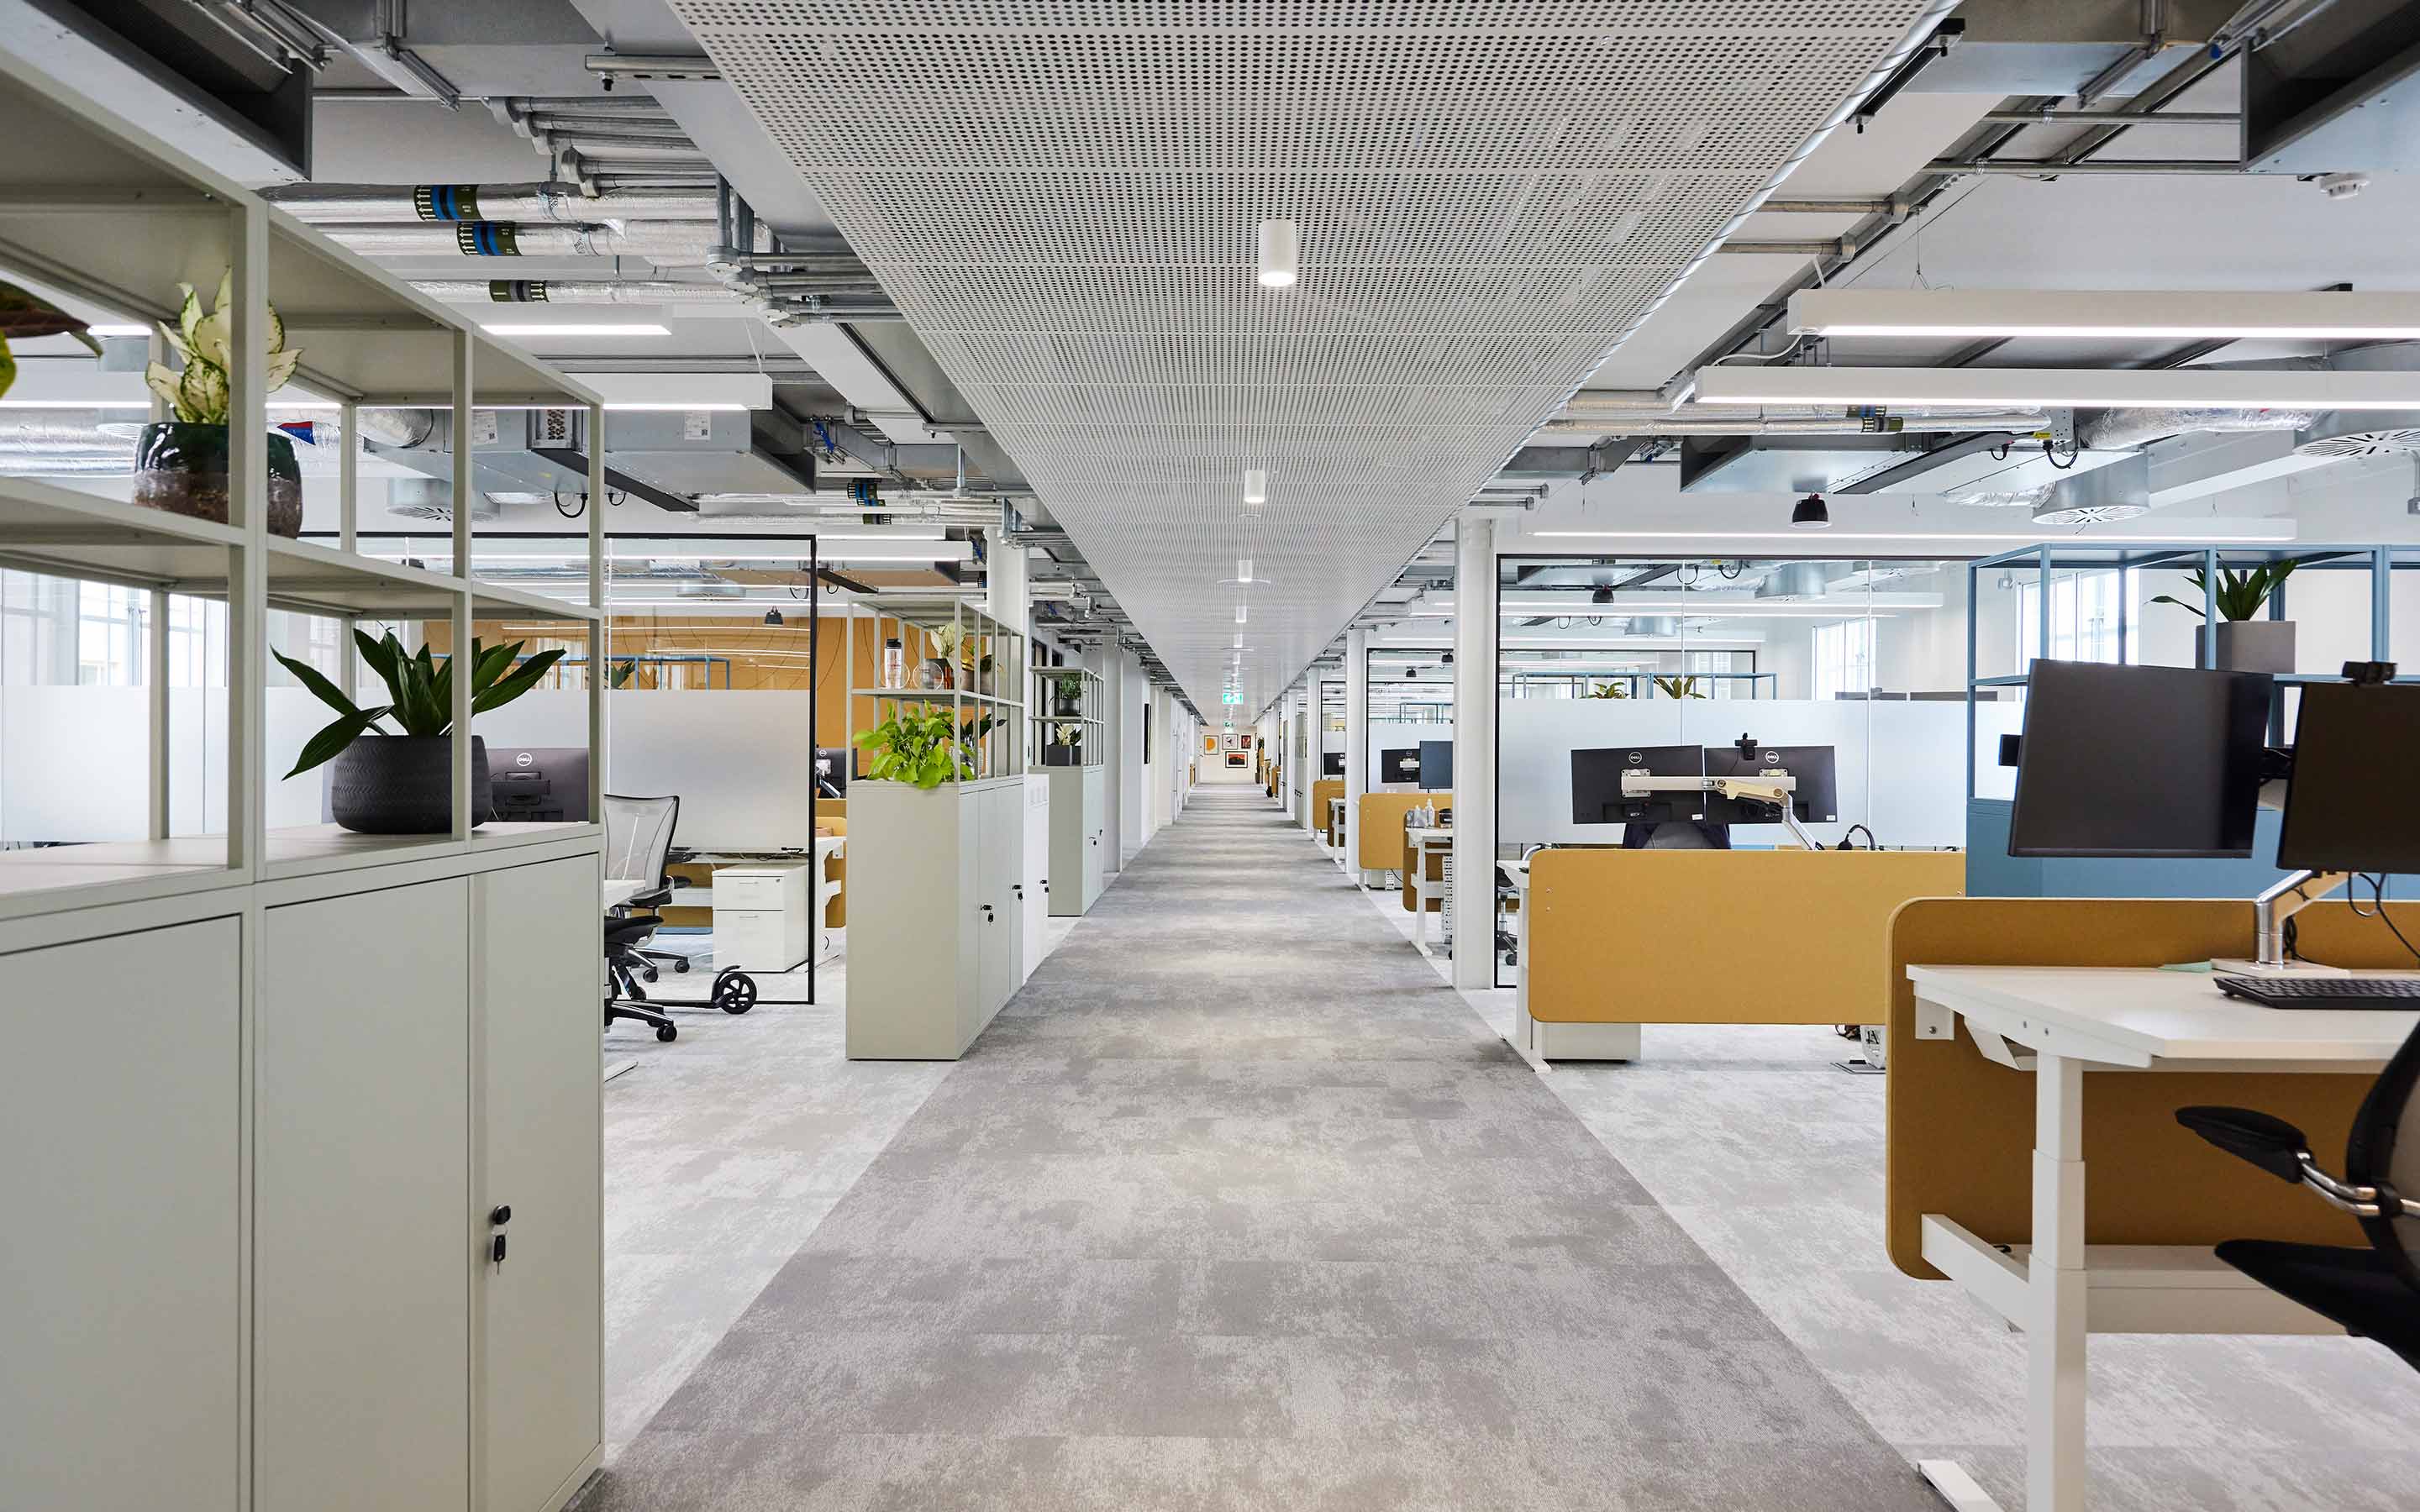 The corridor through an open plan office, with desks, acoustic panels, exposed mechanical and engineering services, and a carpeted floor